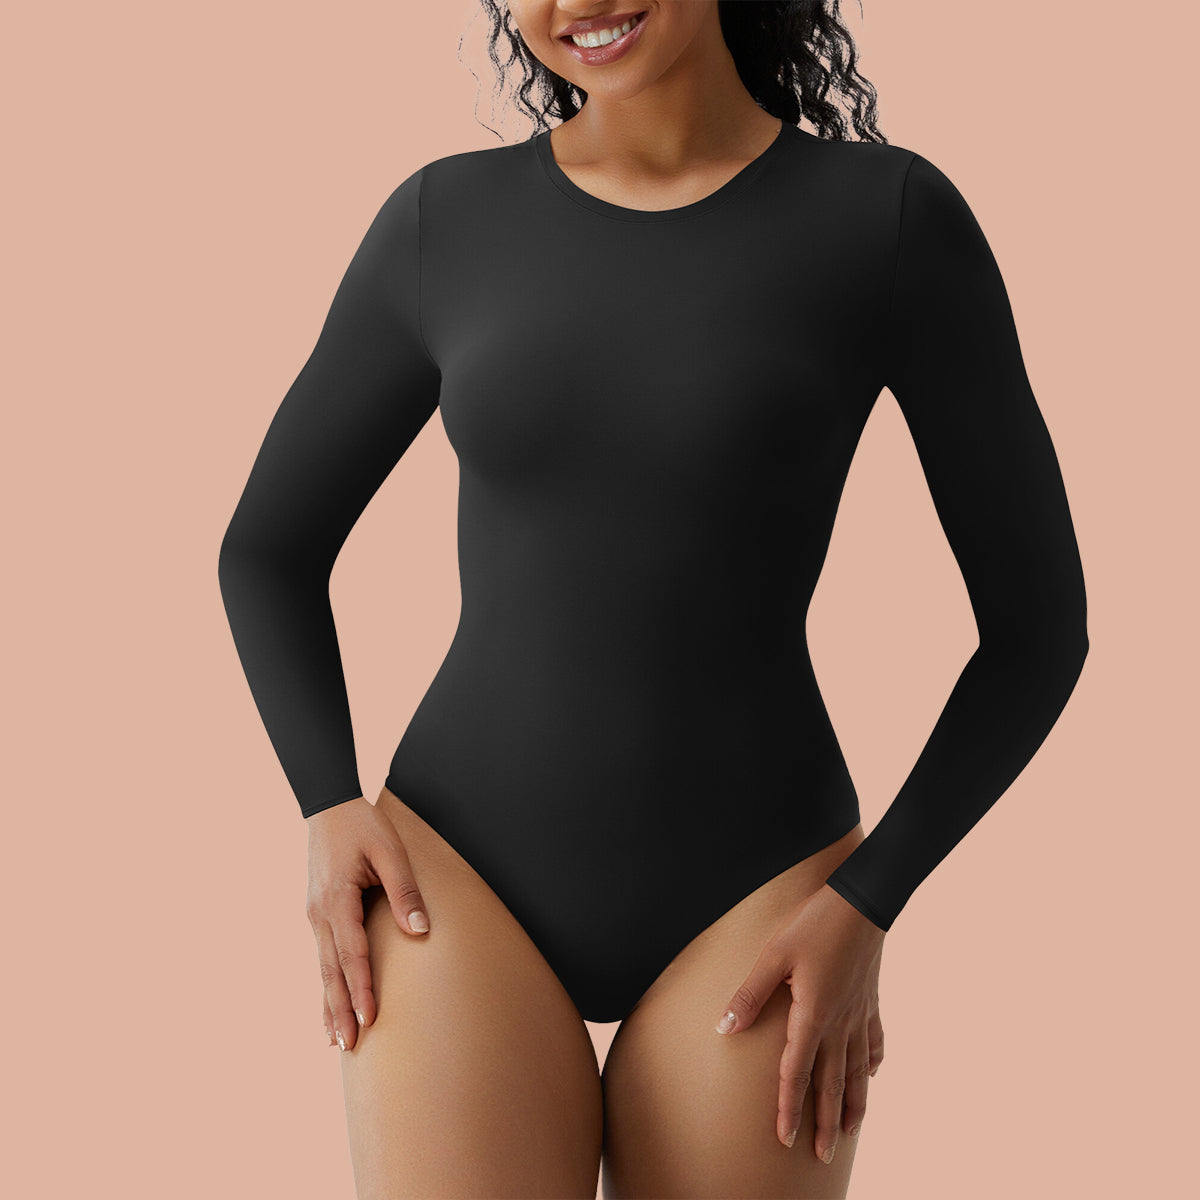 Womens Crew Neck Long Sleeve Bodysuit Comfortable Against The Skin Tops  Sexy Body Suits Women Adult Pajamas (Black, XL)